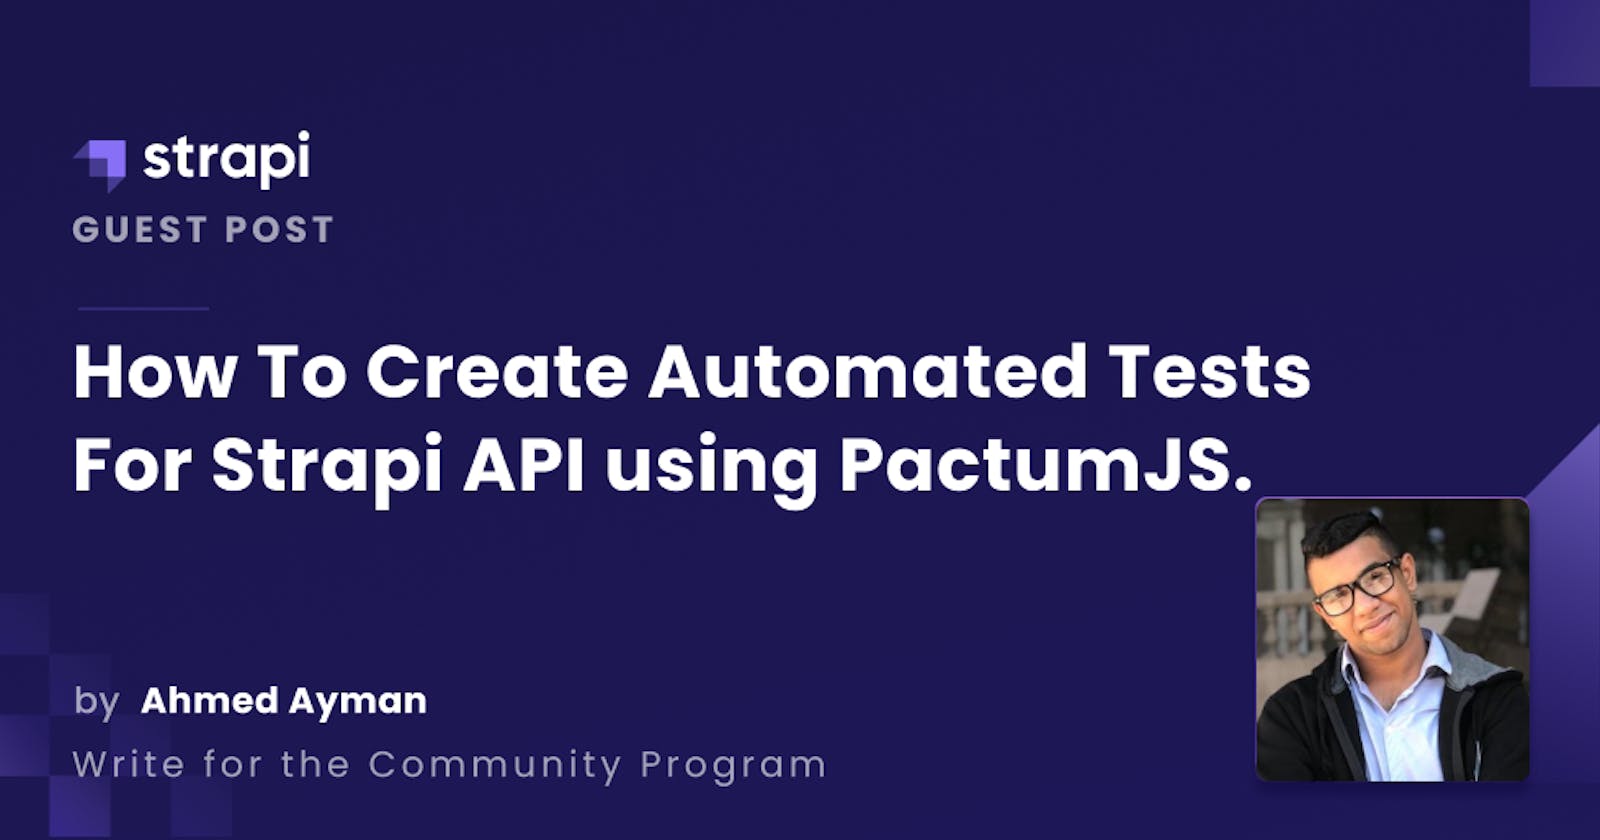 How To Create Automated Tests For Strapi API using PactumJS